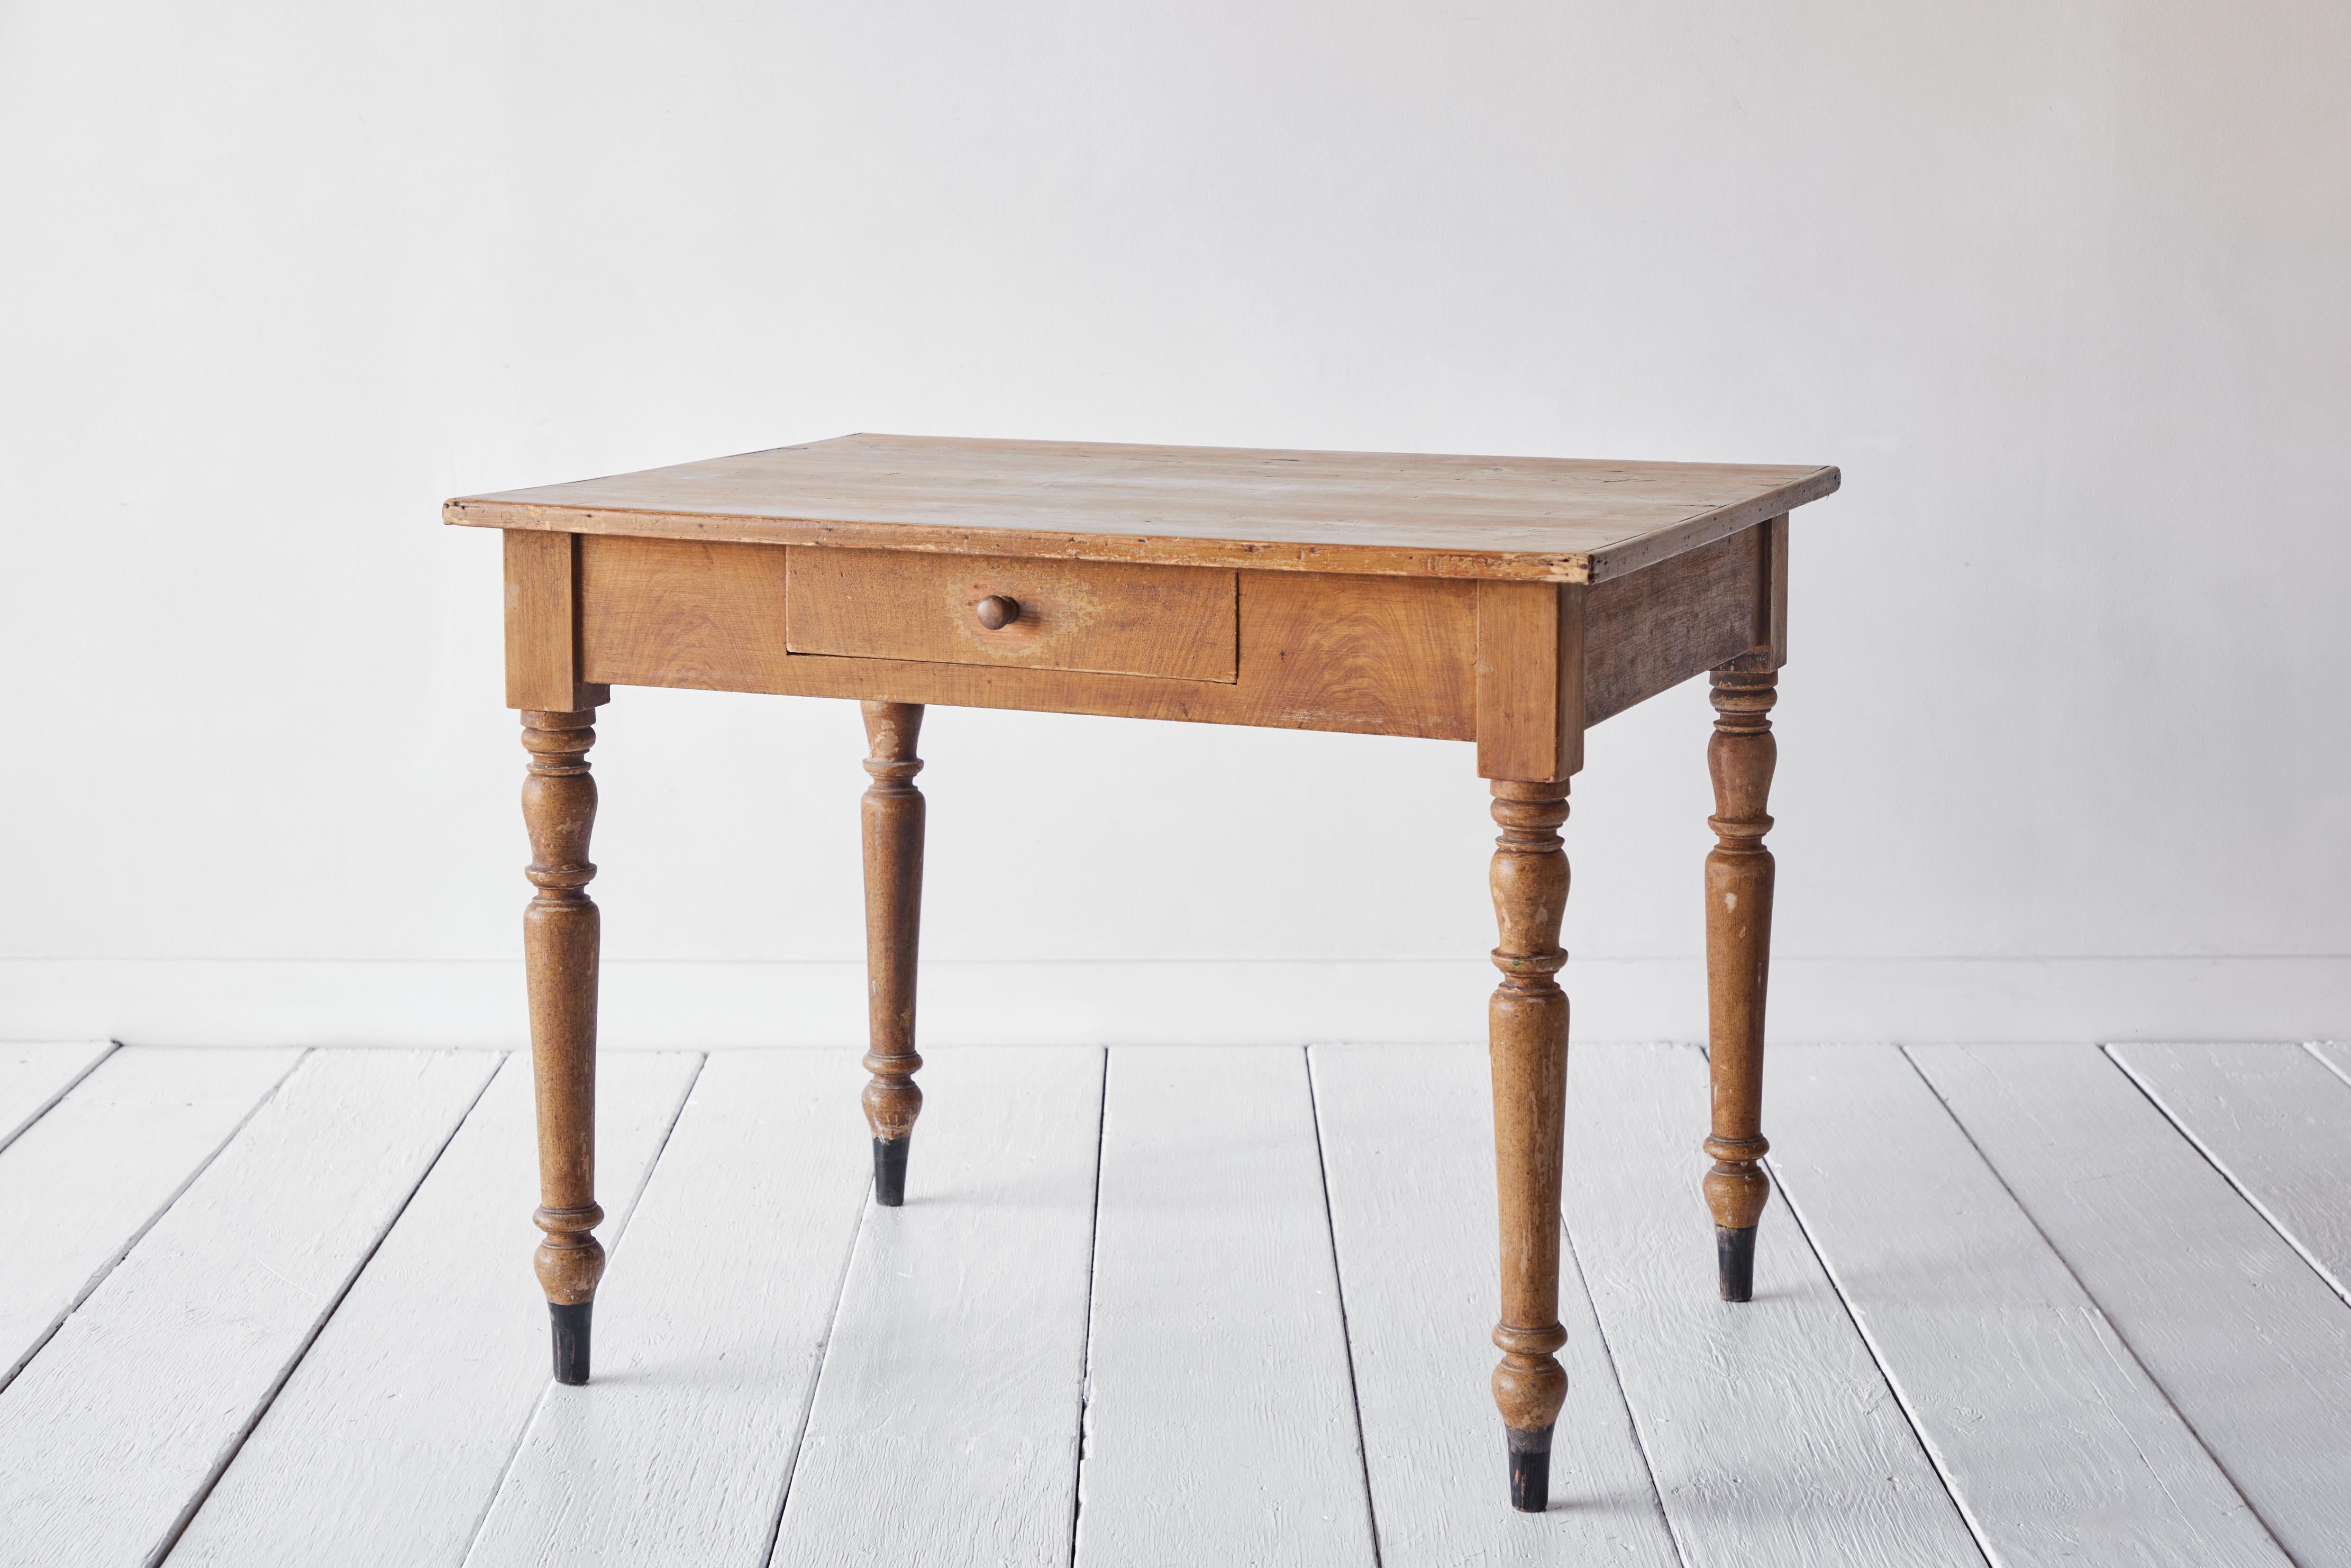 20th Century Rustic Early American Table with Single Drawer